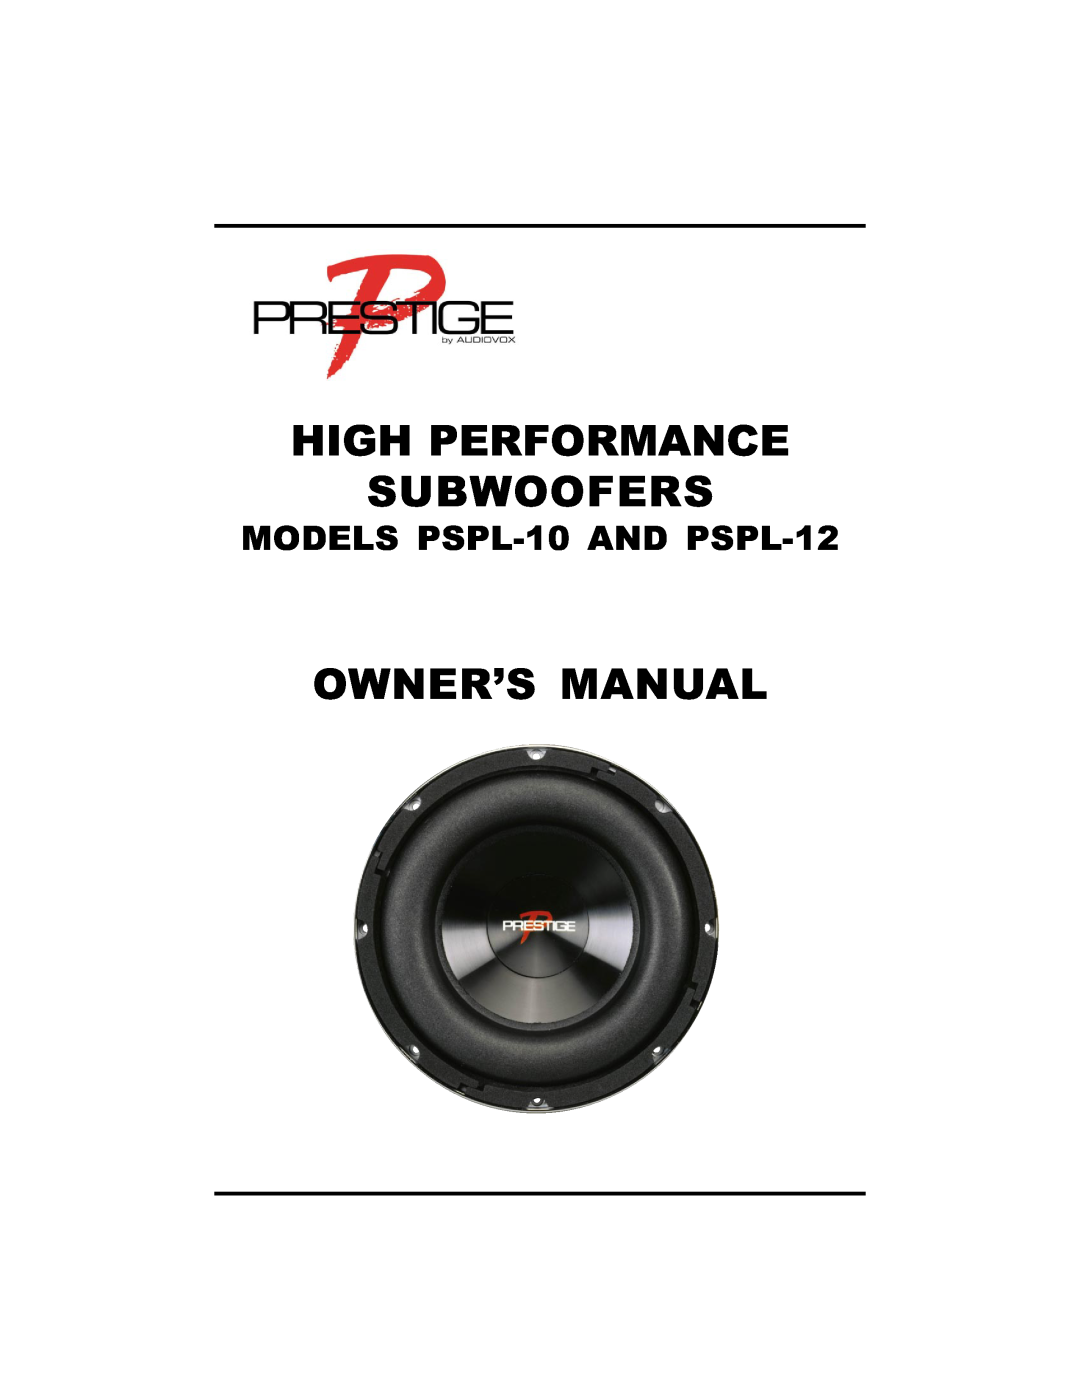 Audiovox ACD12 manual High Performance Subwoofers, MODELS PSPL-10AND PSPL-12 